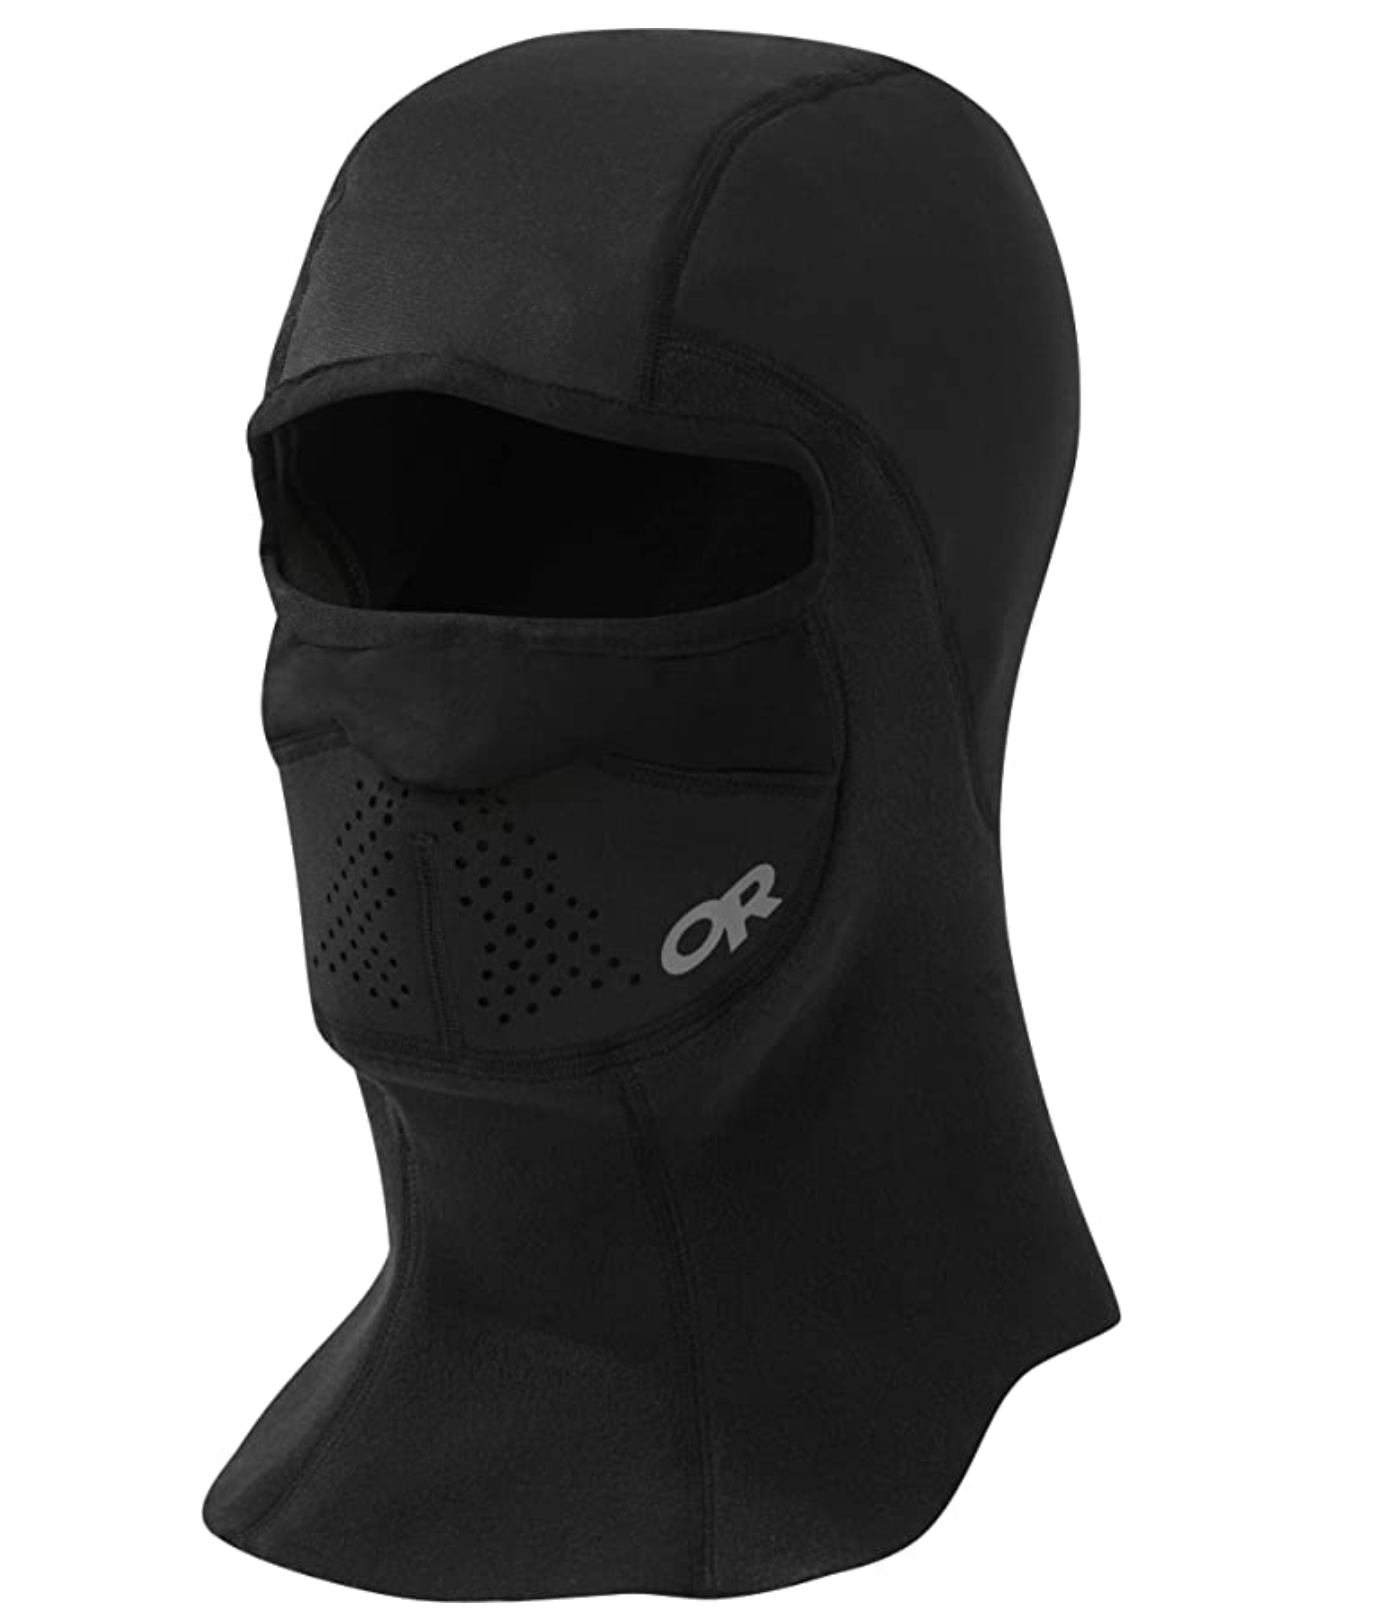 Guide to the 7 Best Balaclavas for Winter | ActionHub